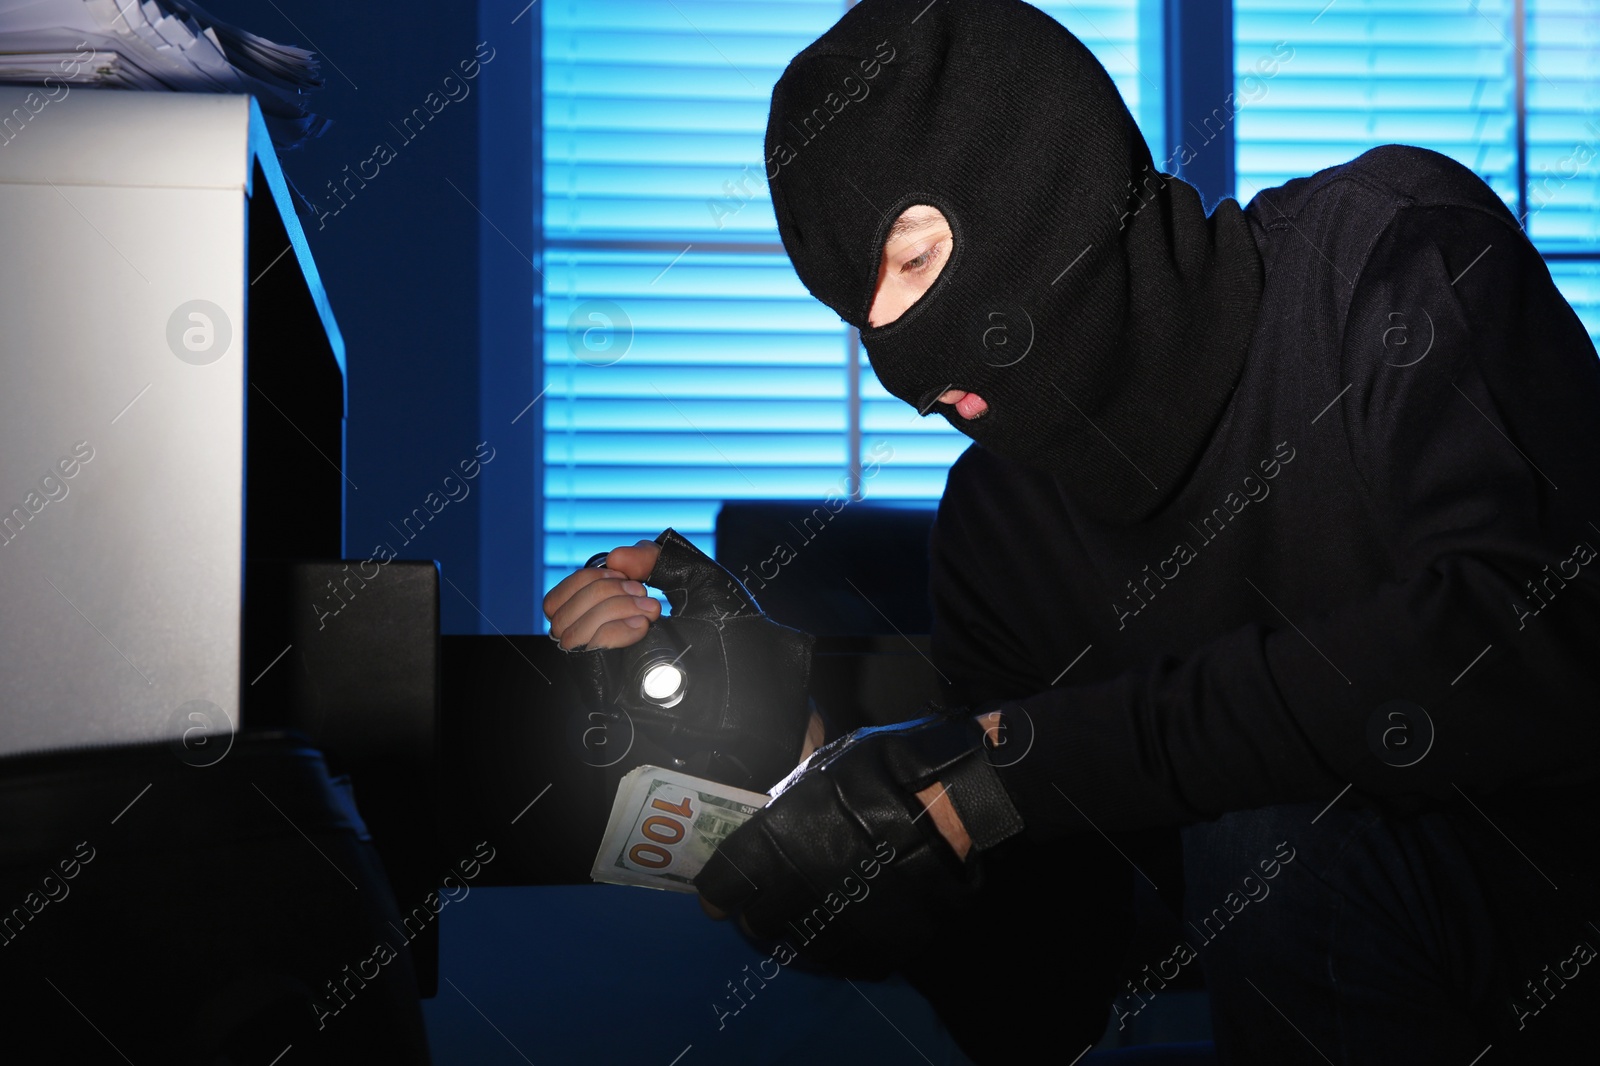 Photo of Thief taking money out of steel safe indoors at night